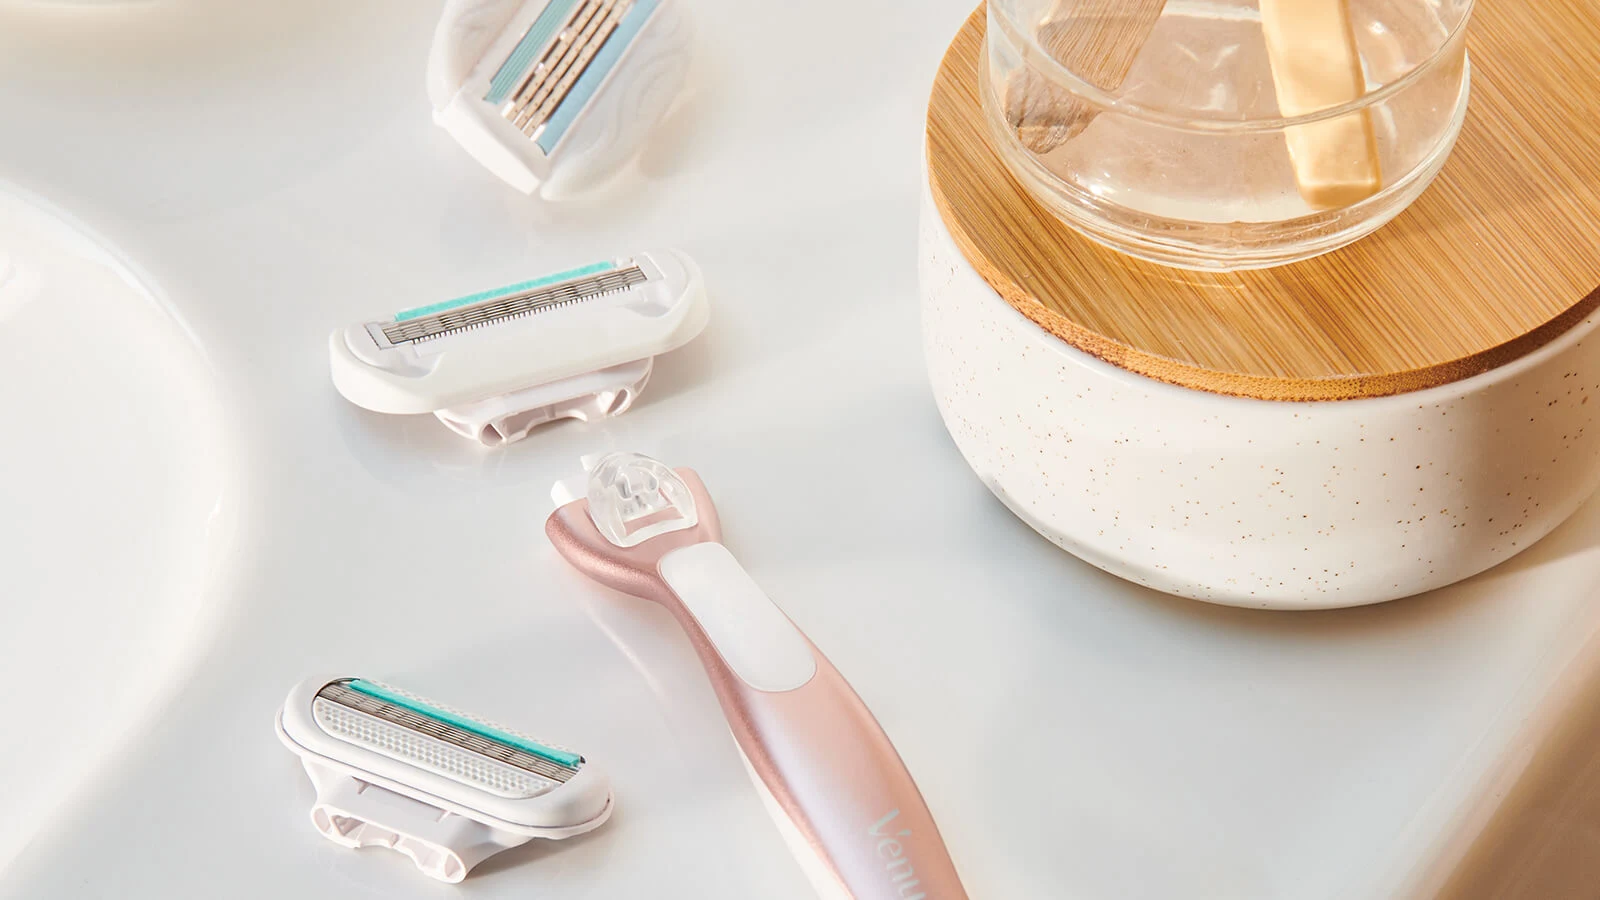 Deluxe Smooth Sensitive Rosegold razor with refills placed on the bathroom sink